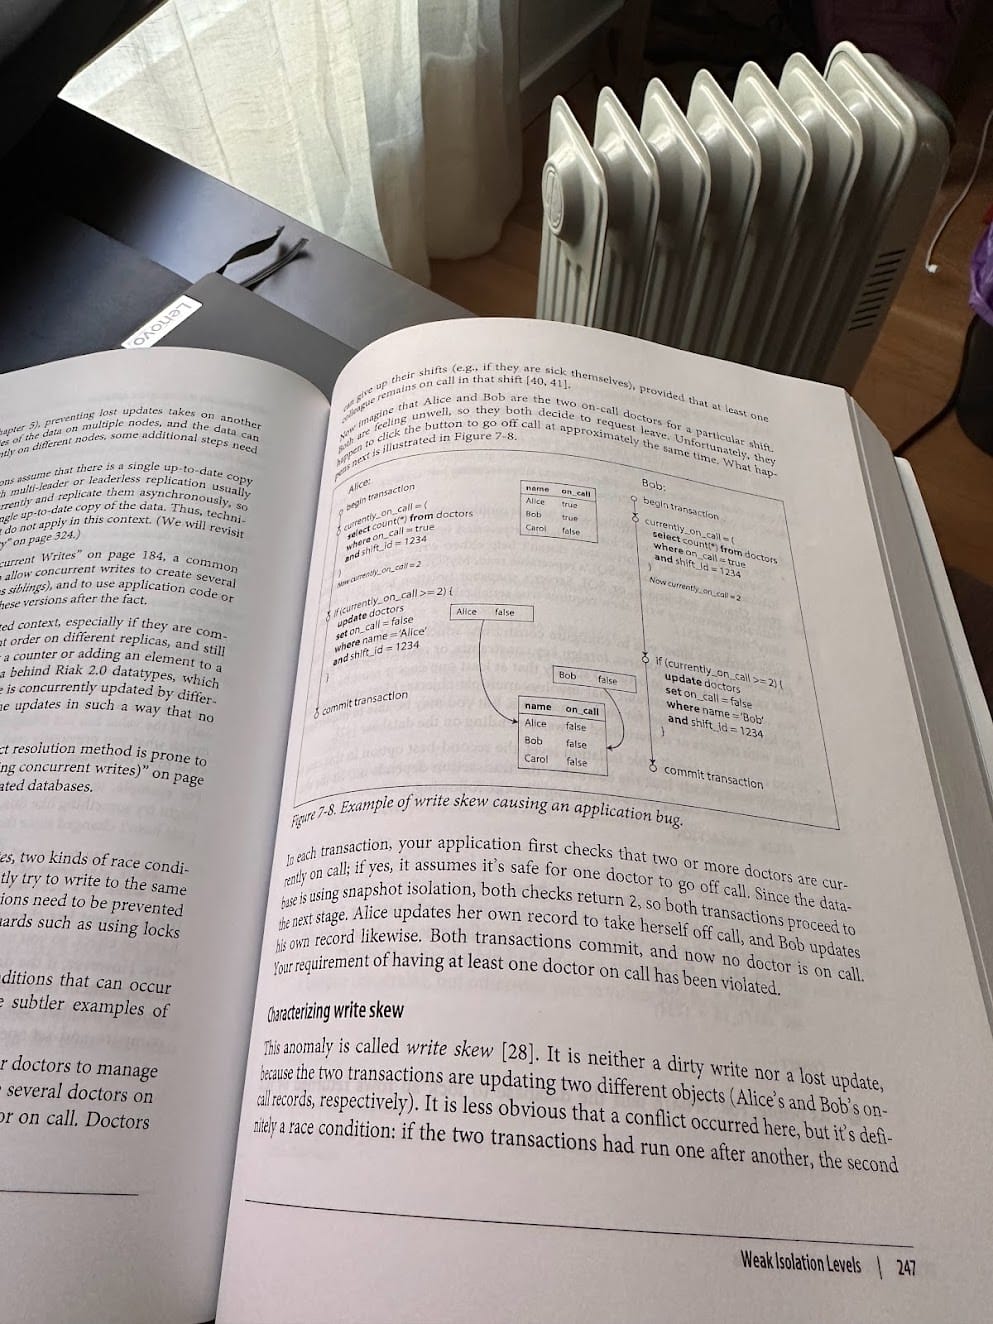 Write skew explained in the book Designing Data-Intensive Applications